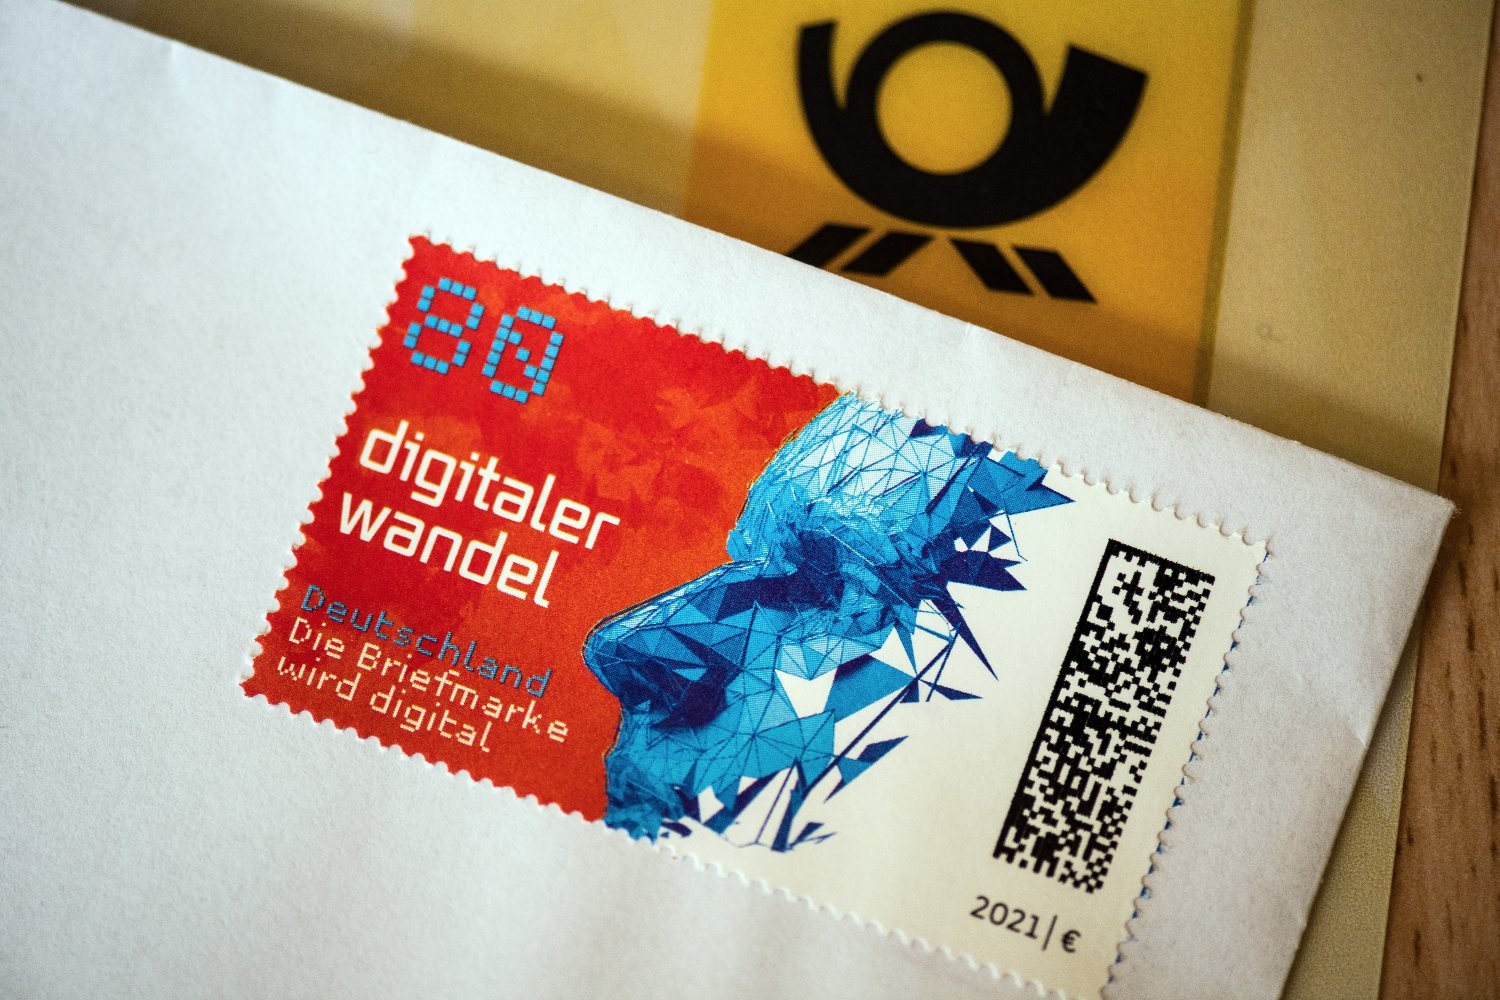 'A new generation of stamps': Deutsche Post rolls out QR-style tracking codes